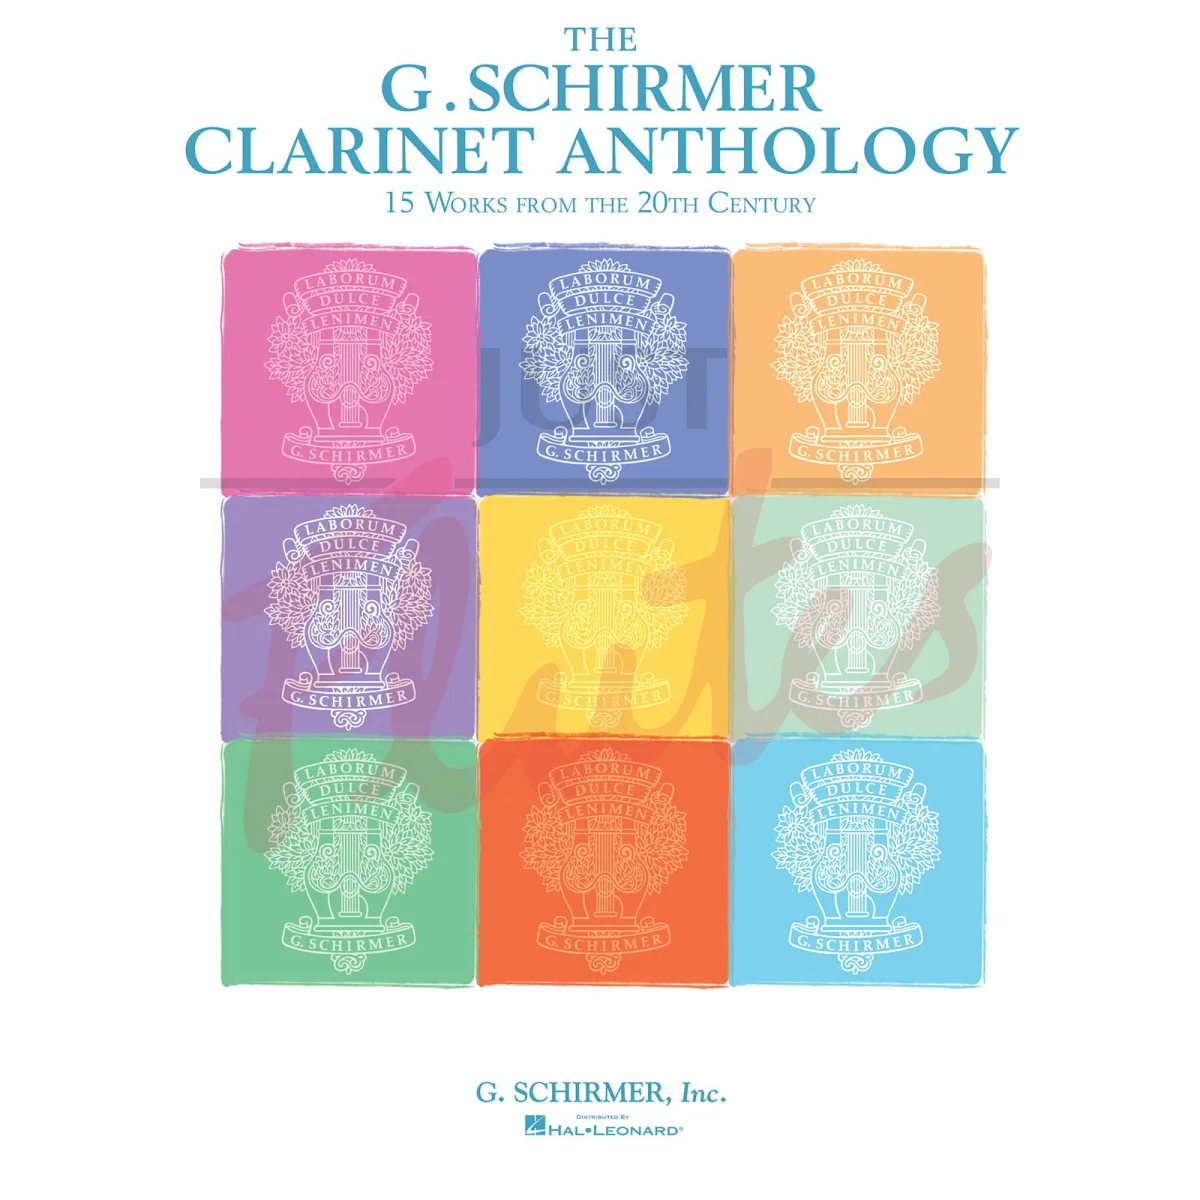 G. Schirmer Clarinet Anthology: Works from the 20th and 21st Centuries